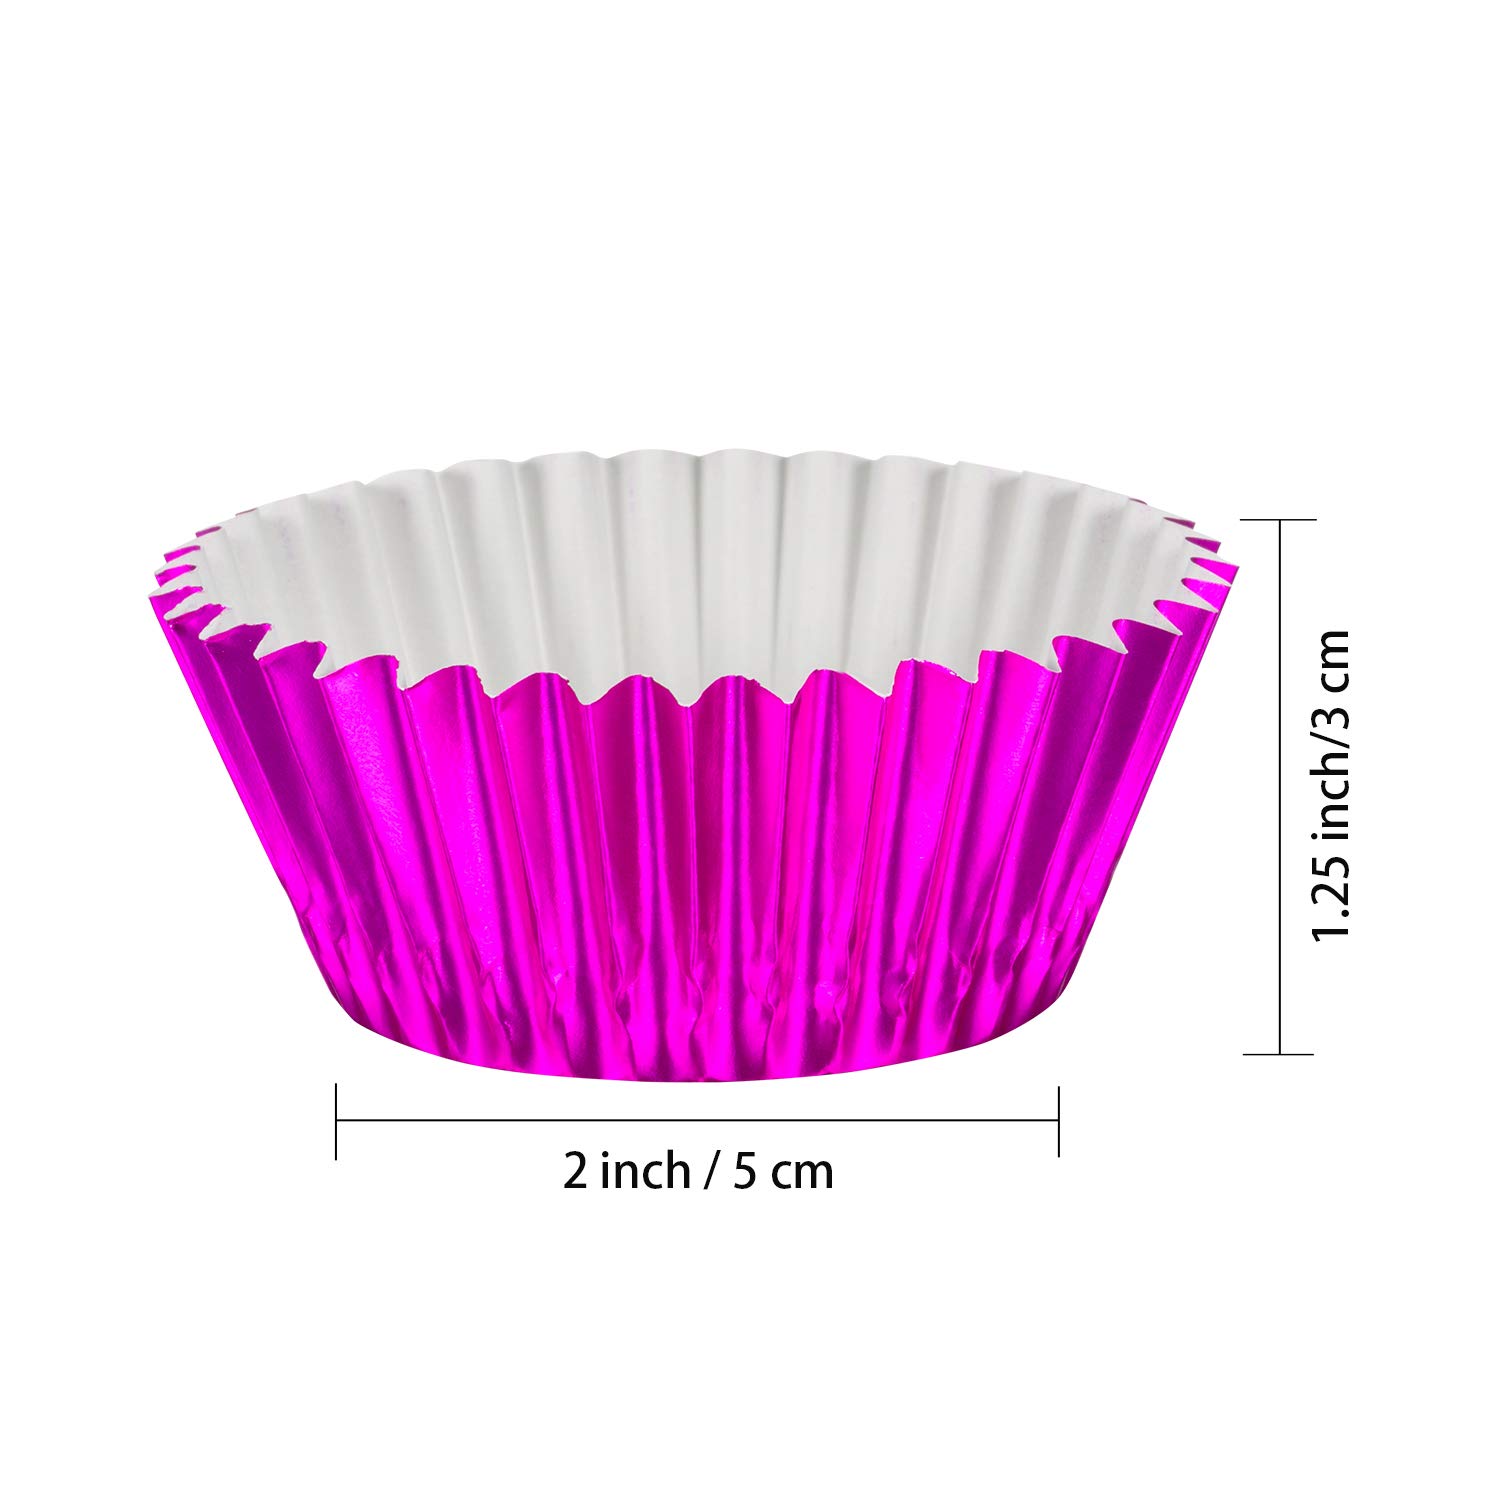 200 Pieces Sumind Foil Cupcake Liners Standard Size Metallic Cupcake Liners Paper Baking Cups Muffin Case Decoration Cups, 10 Colors